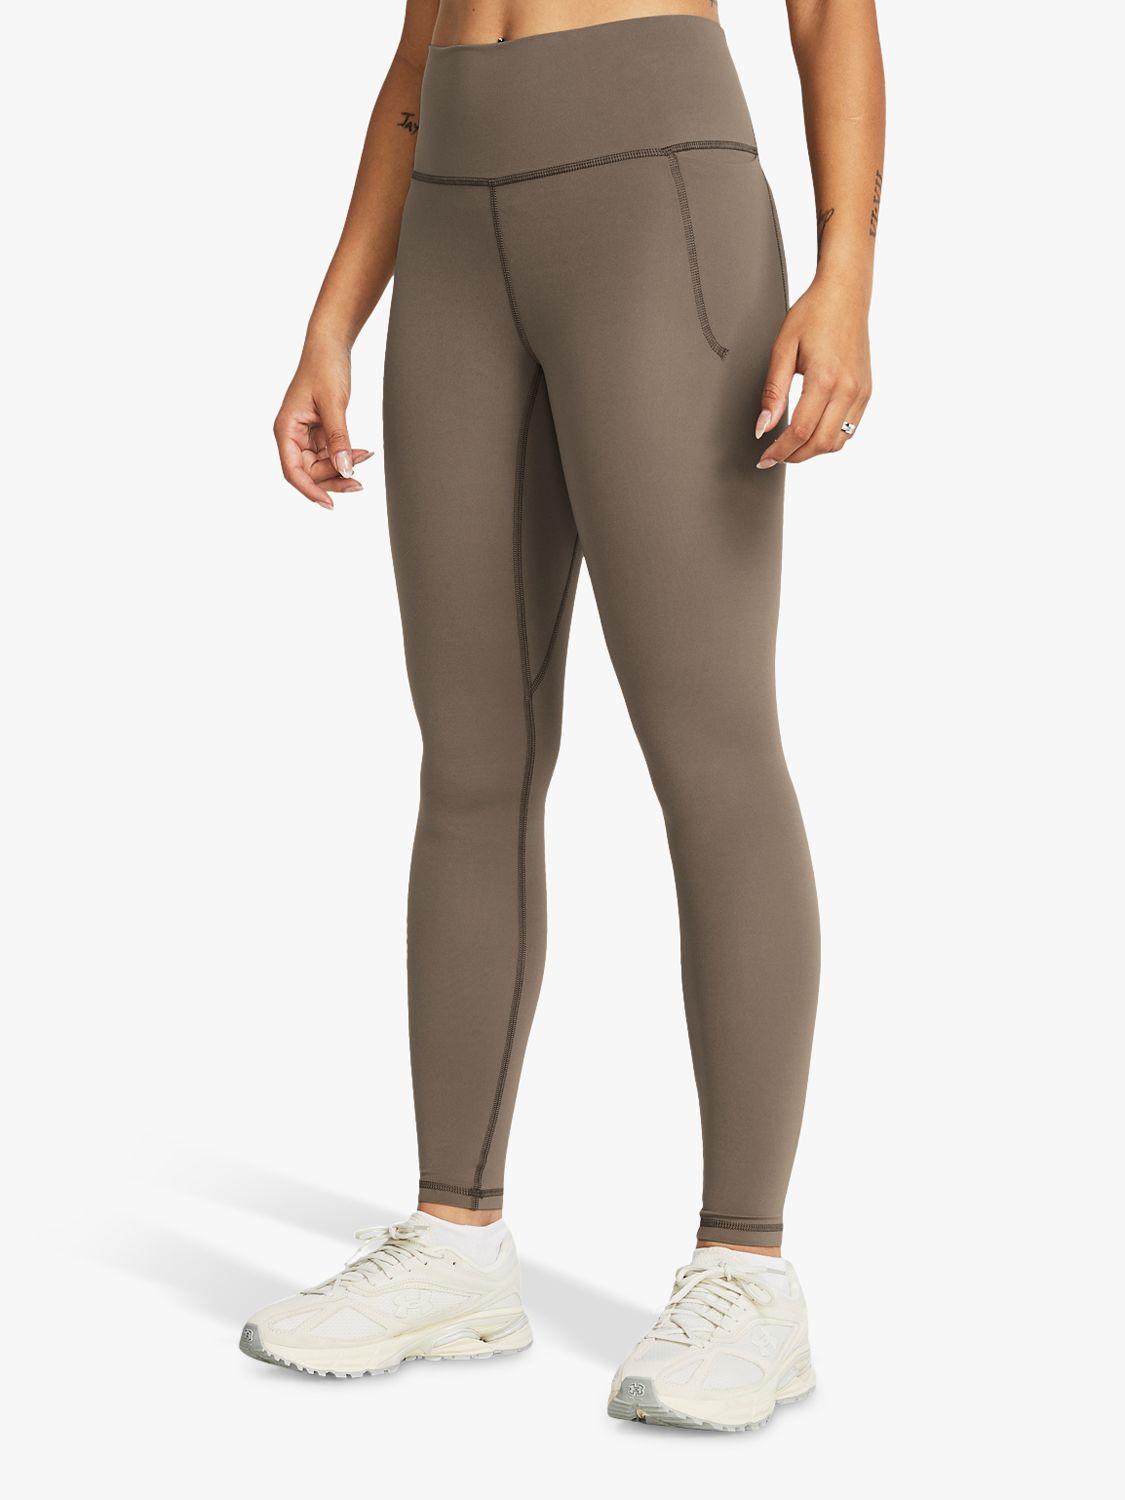 Under Armour Women's Meridian Tights